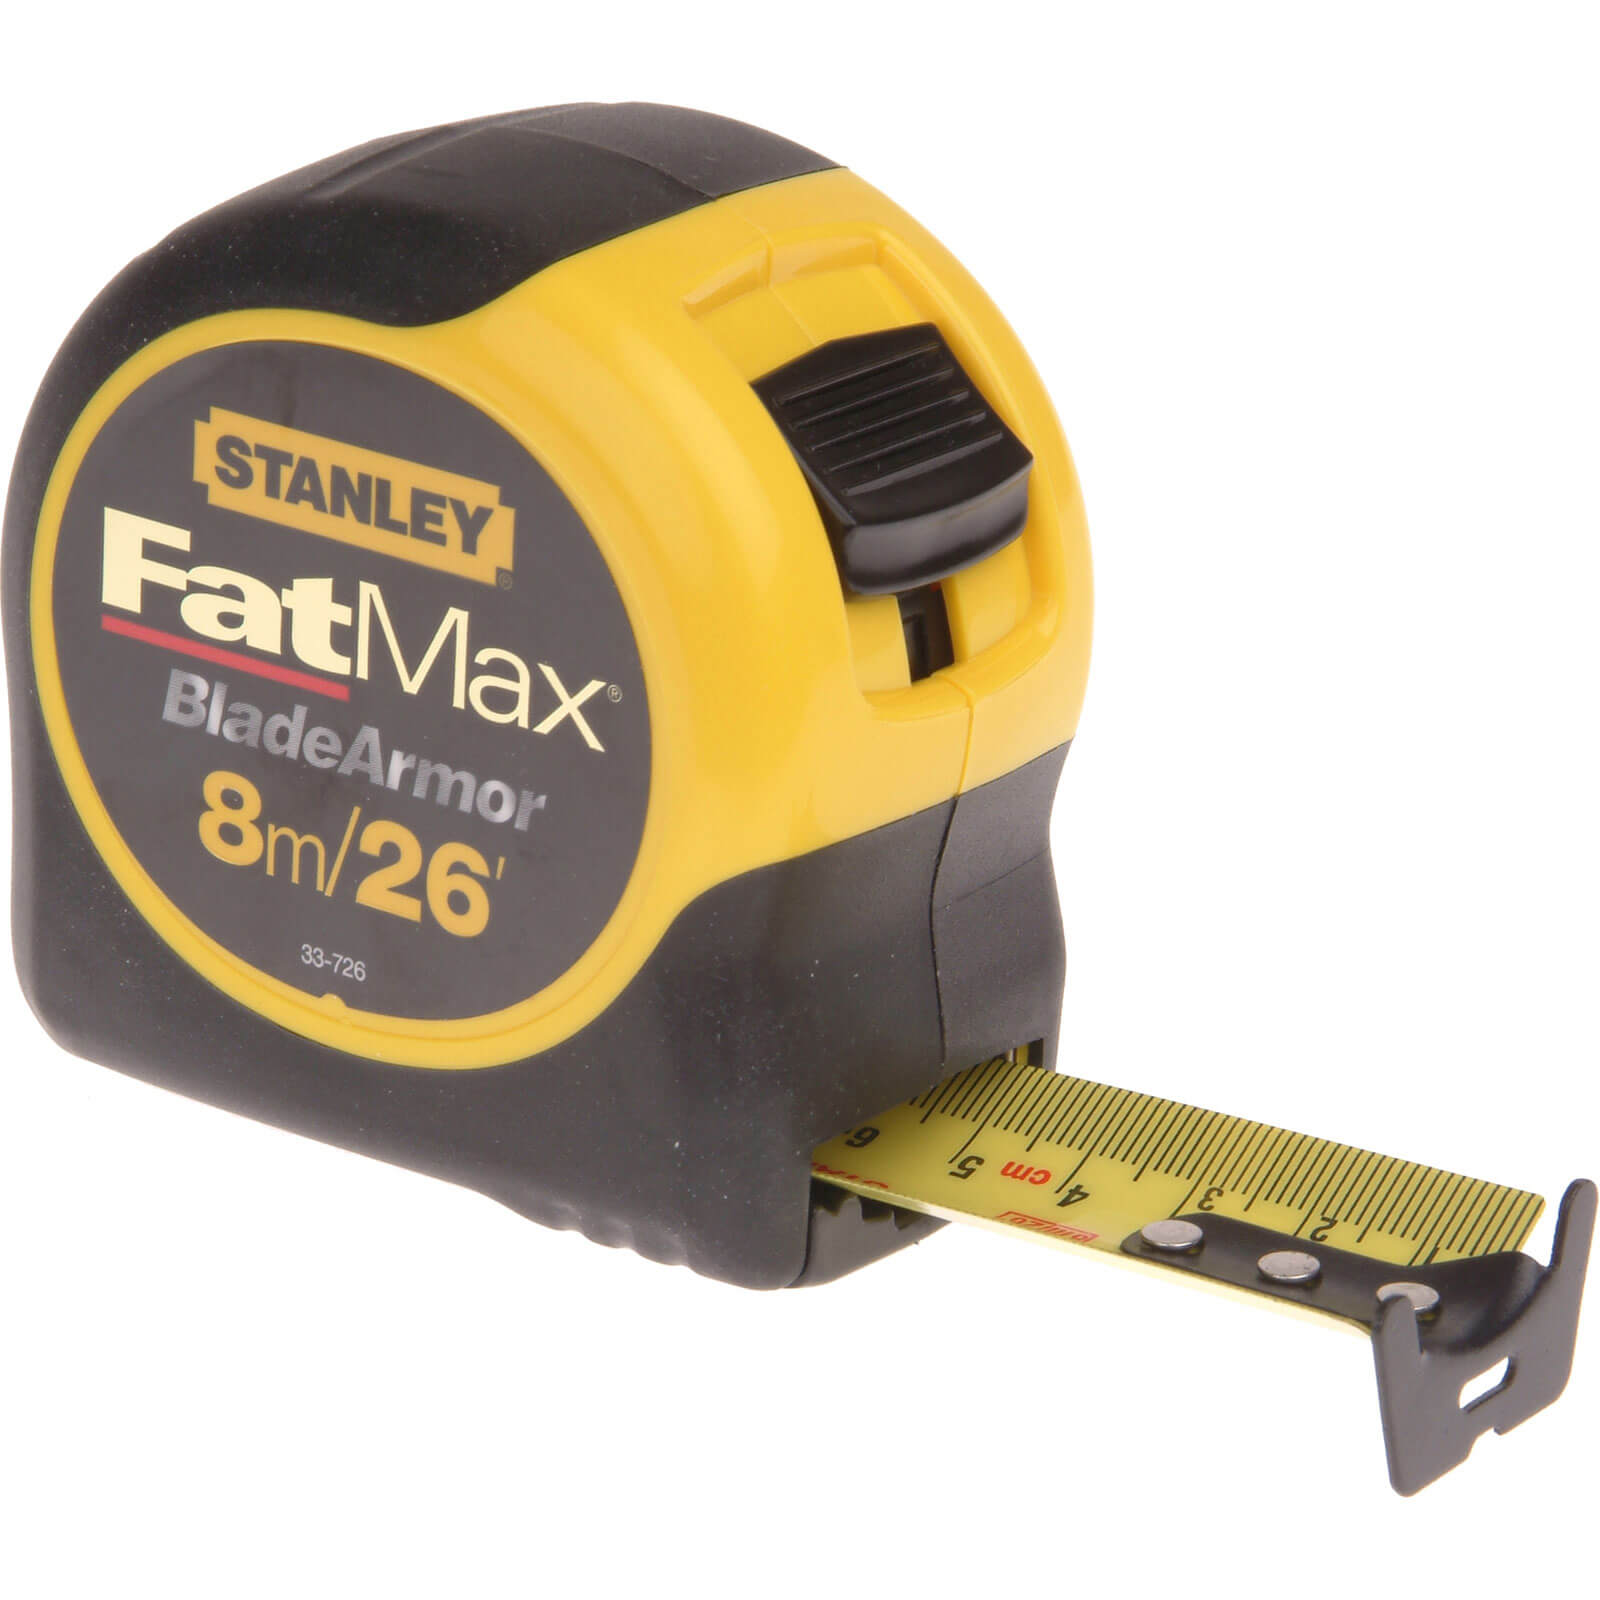 Photo of Stanley Fatmax Blade Armor Tape Measure Imperial & Metric 26ft / 8m 32mm